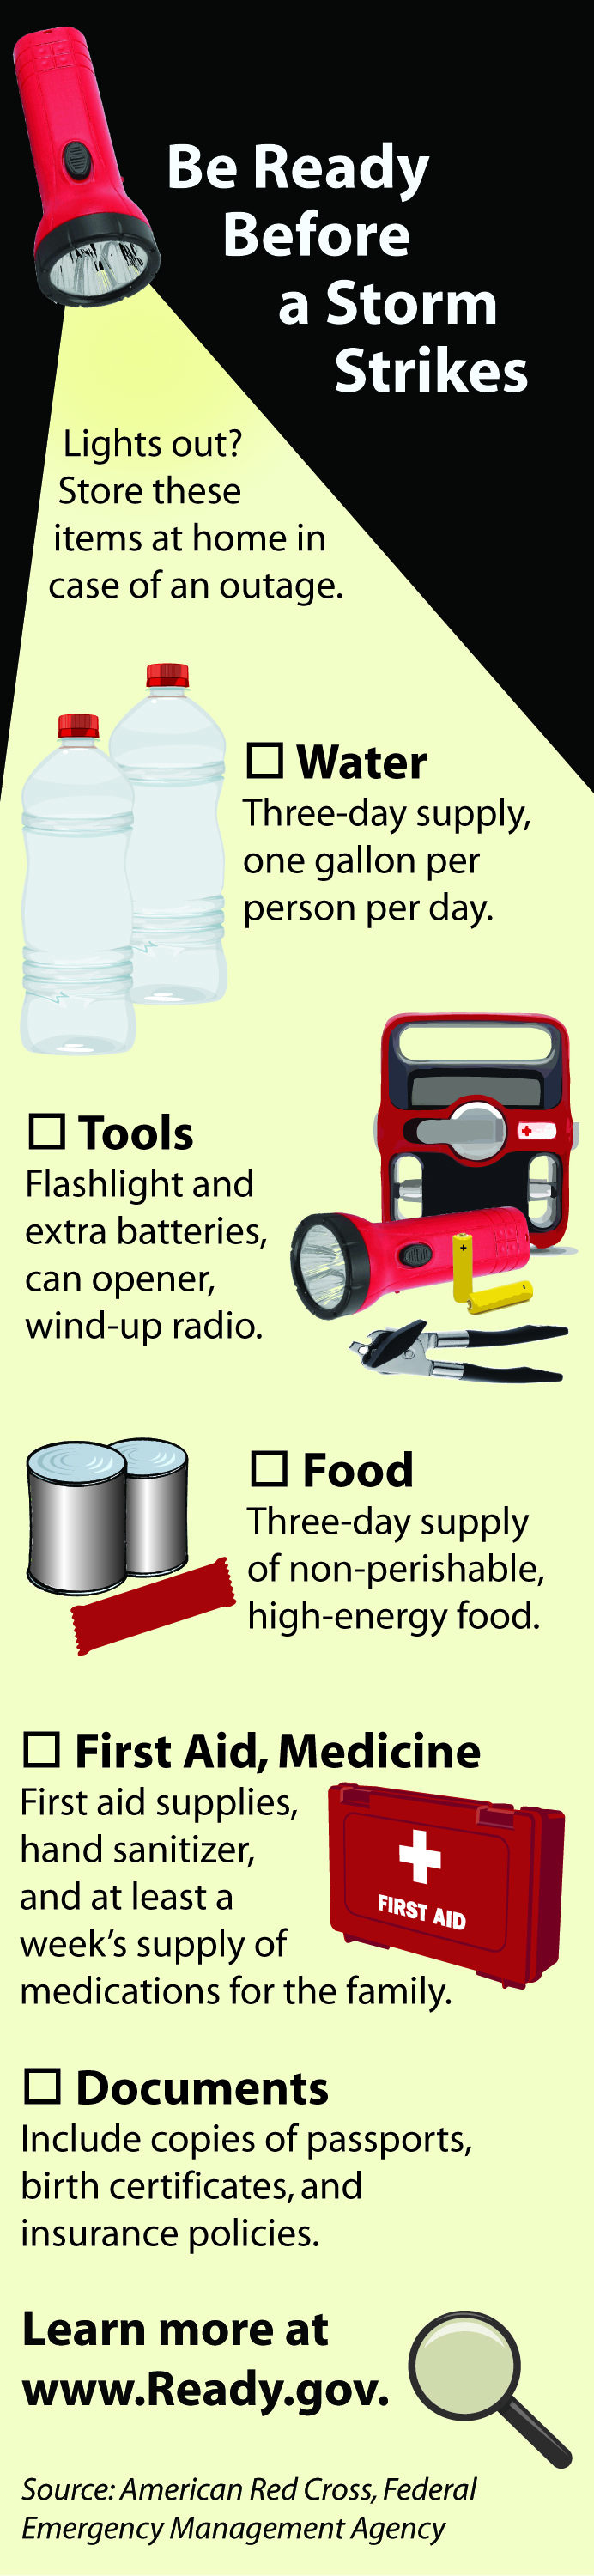 Be ready before a storm strikes! Lights out? Store these items at home in case of an outage: Water (three-day supply, one gallon per person per day), Tools (flashlights and extra batteries, can opener, wind-up radio), Food (three-day supply of non-perishable, high-energy food), First Aid & Medicine (first-aid supplies, hand sanitizer, and at least a week's supply of medications for the family), Documents (include copies of passports, birth certificates, and insurance policies). Learn more at www.ready.gov.